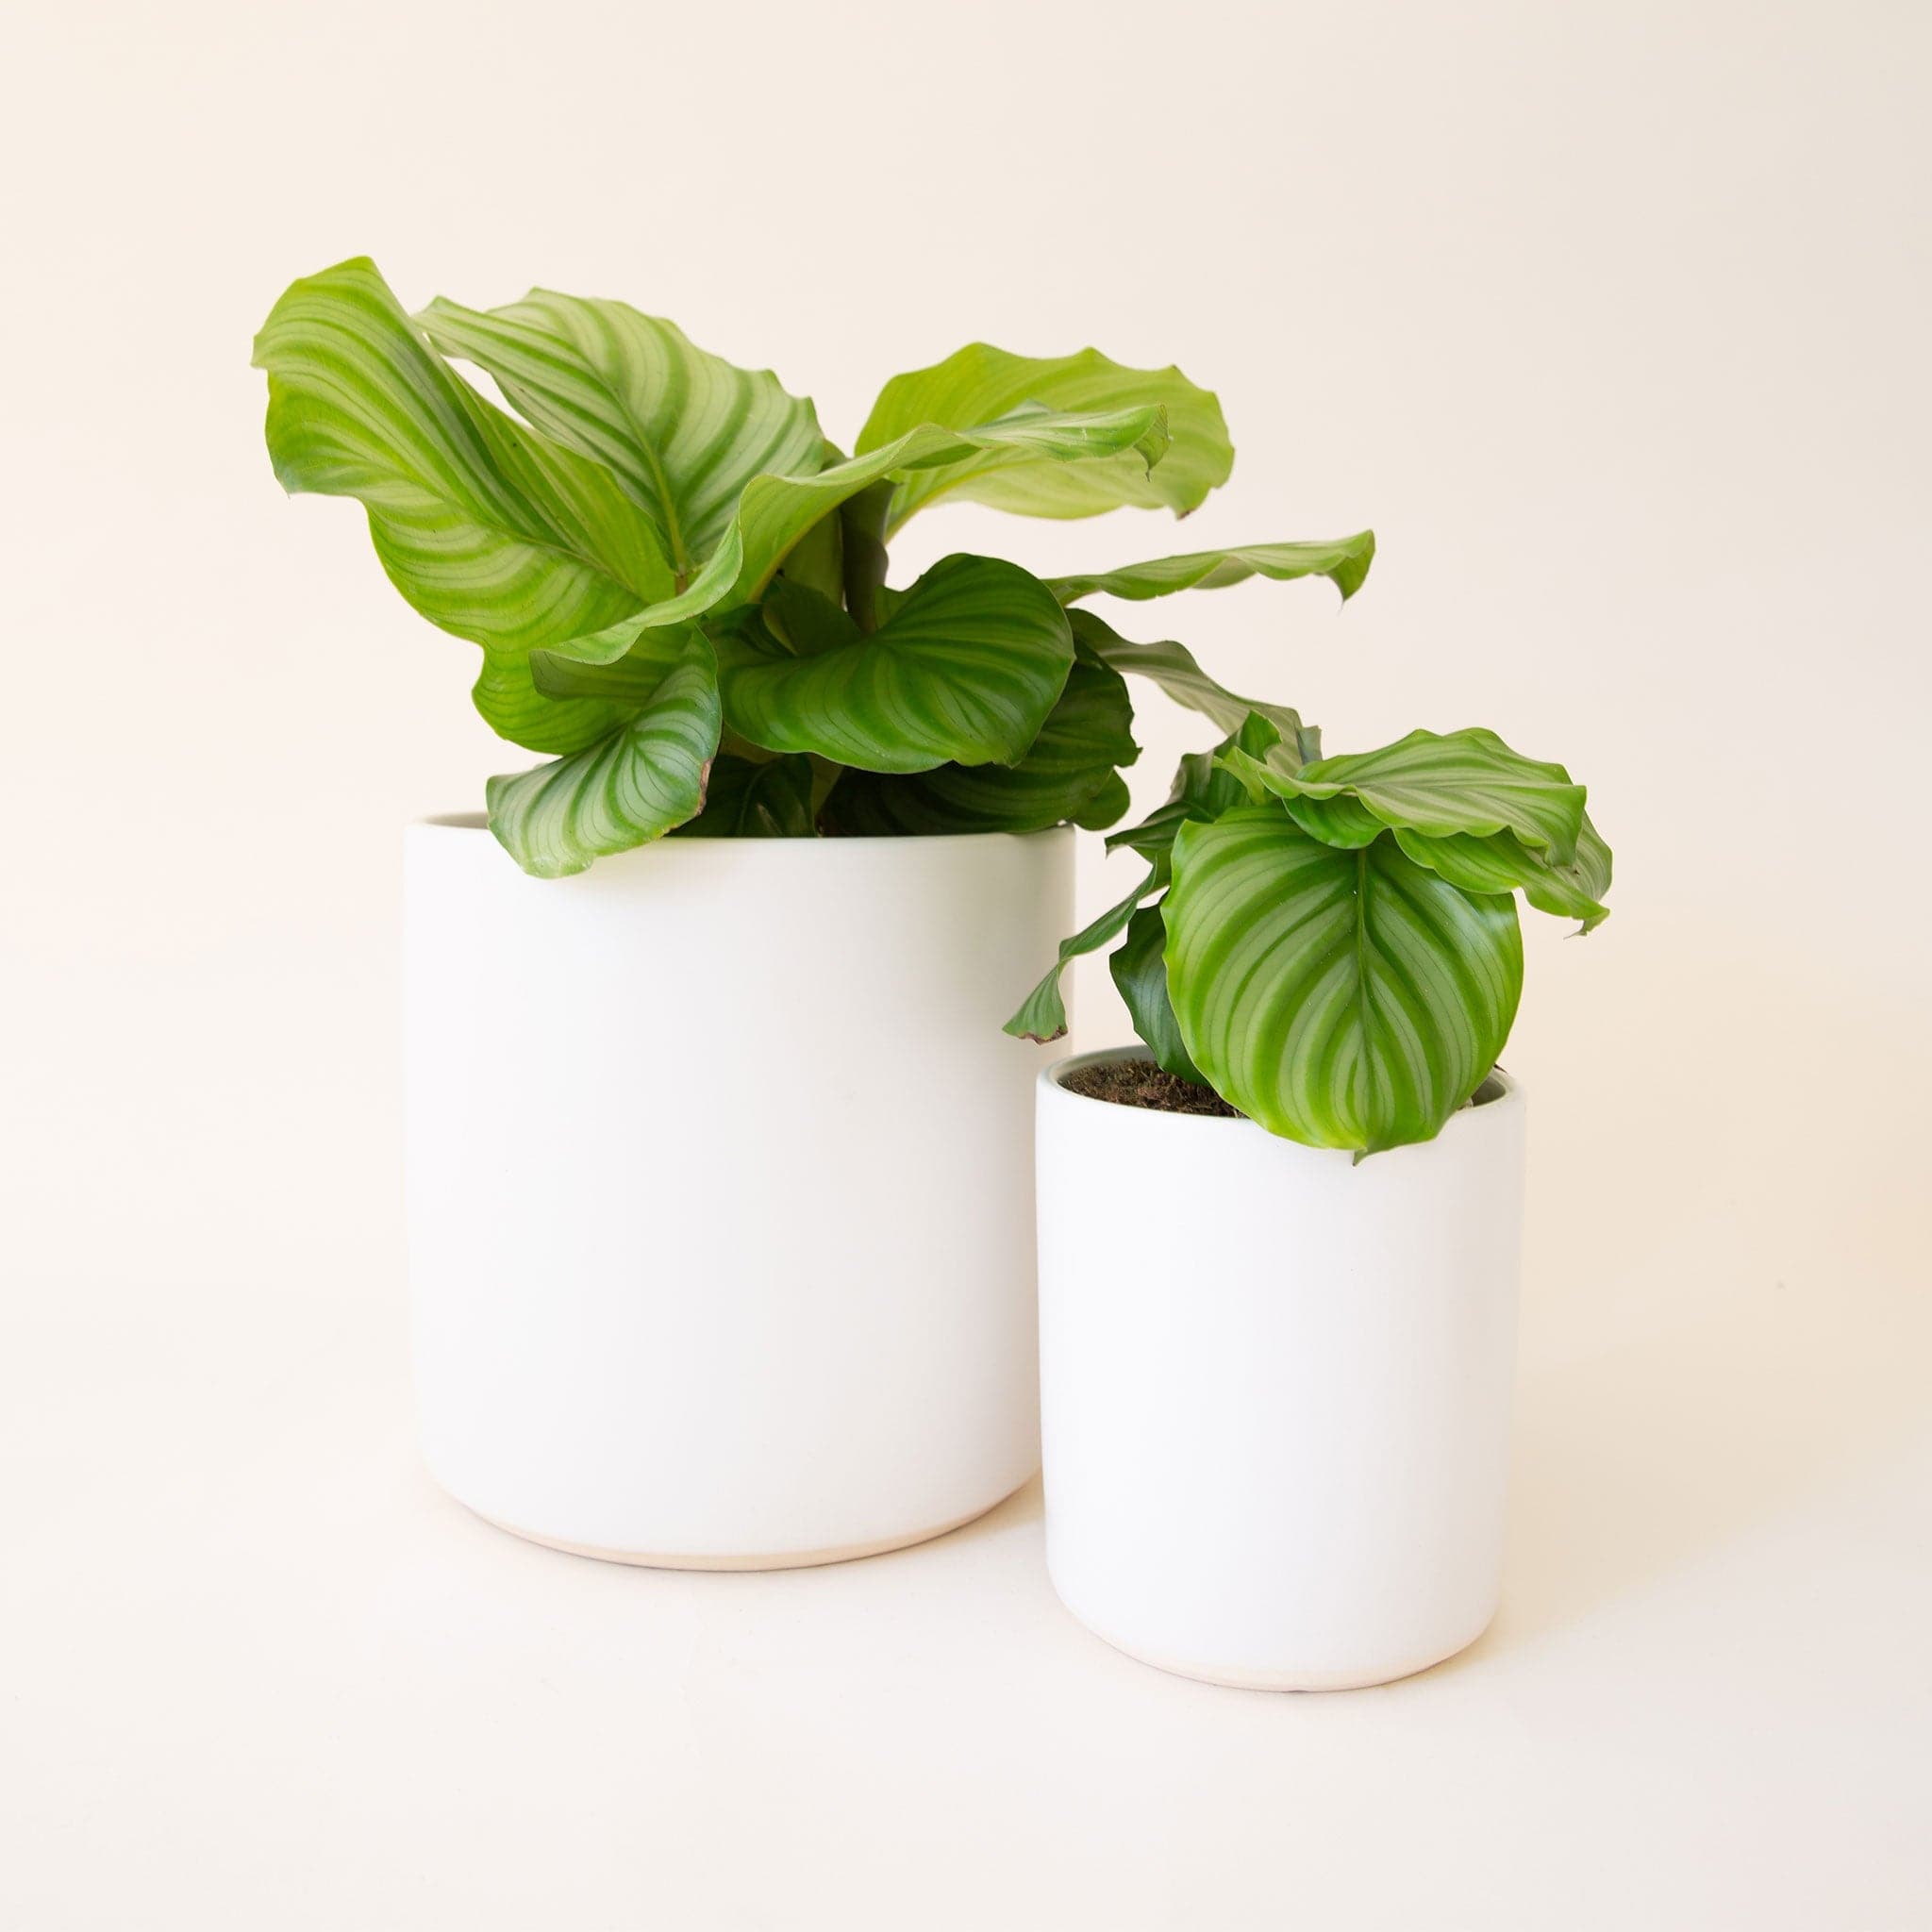 Two wide-leafed plants potted in soldi white pots. Each leaf is filled with pale green and rich green stripes. The pot to the left is larger and the pot to the right is smaller. 